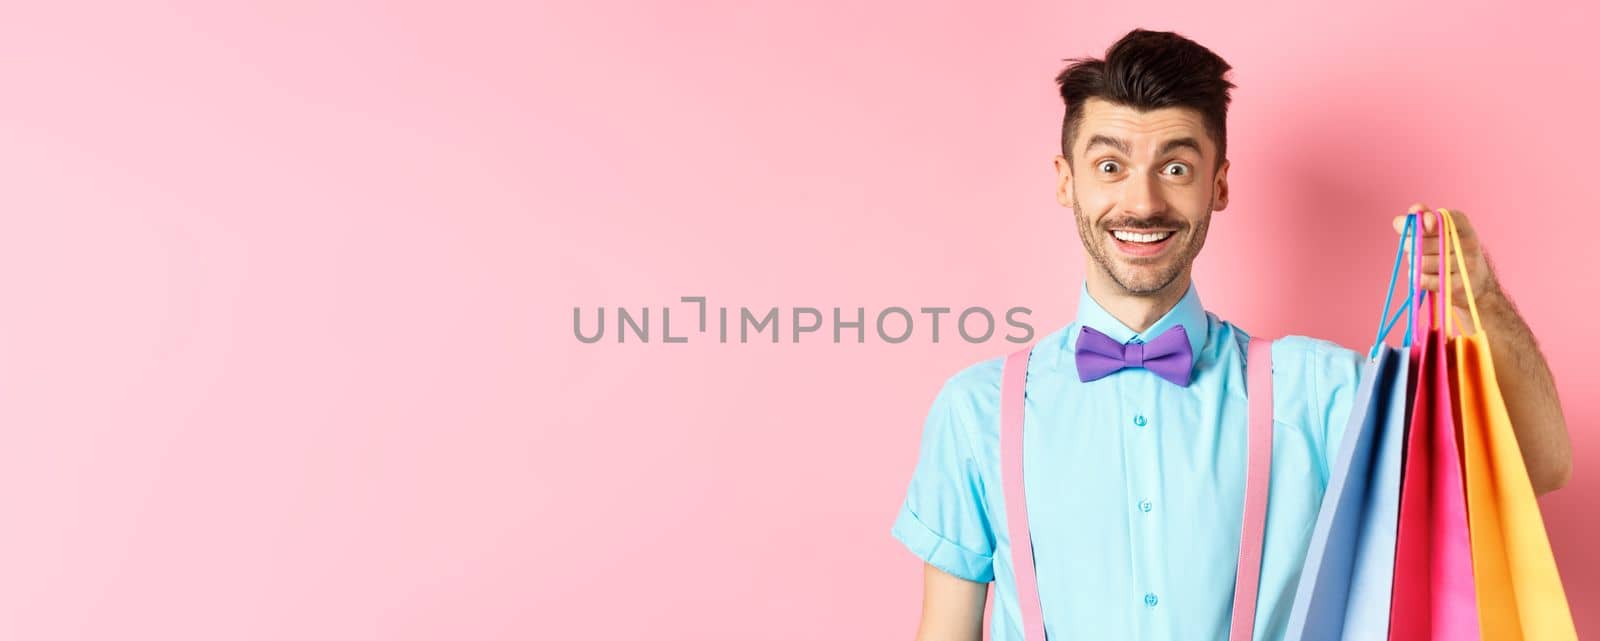 Image of happy guy on shopping, holding paper bags and smiling excited, shopper buying with discounts, standing on pink background.